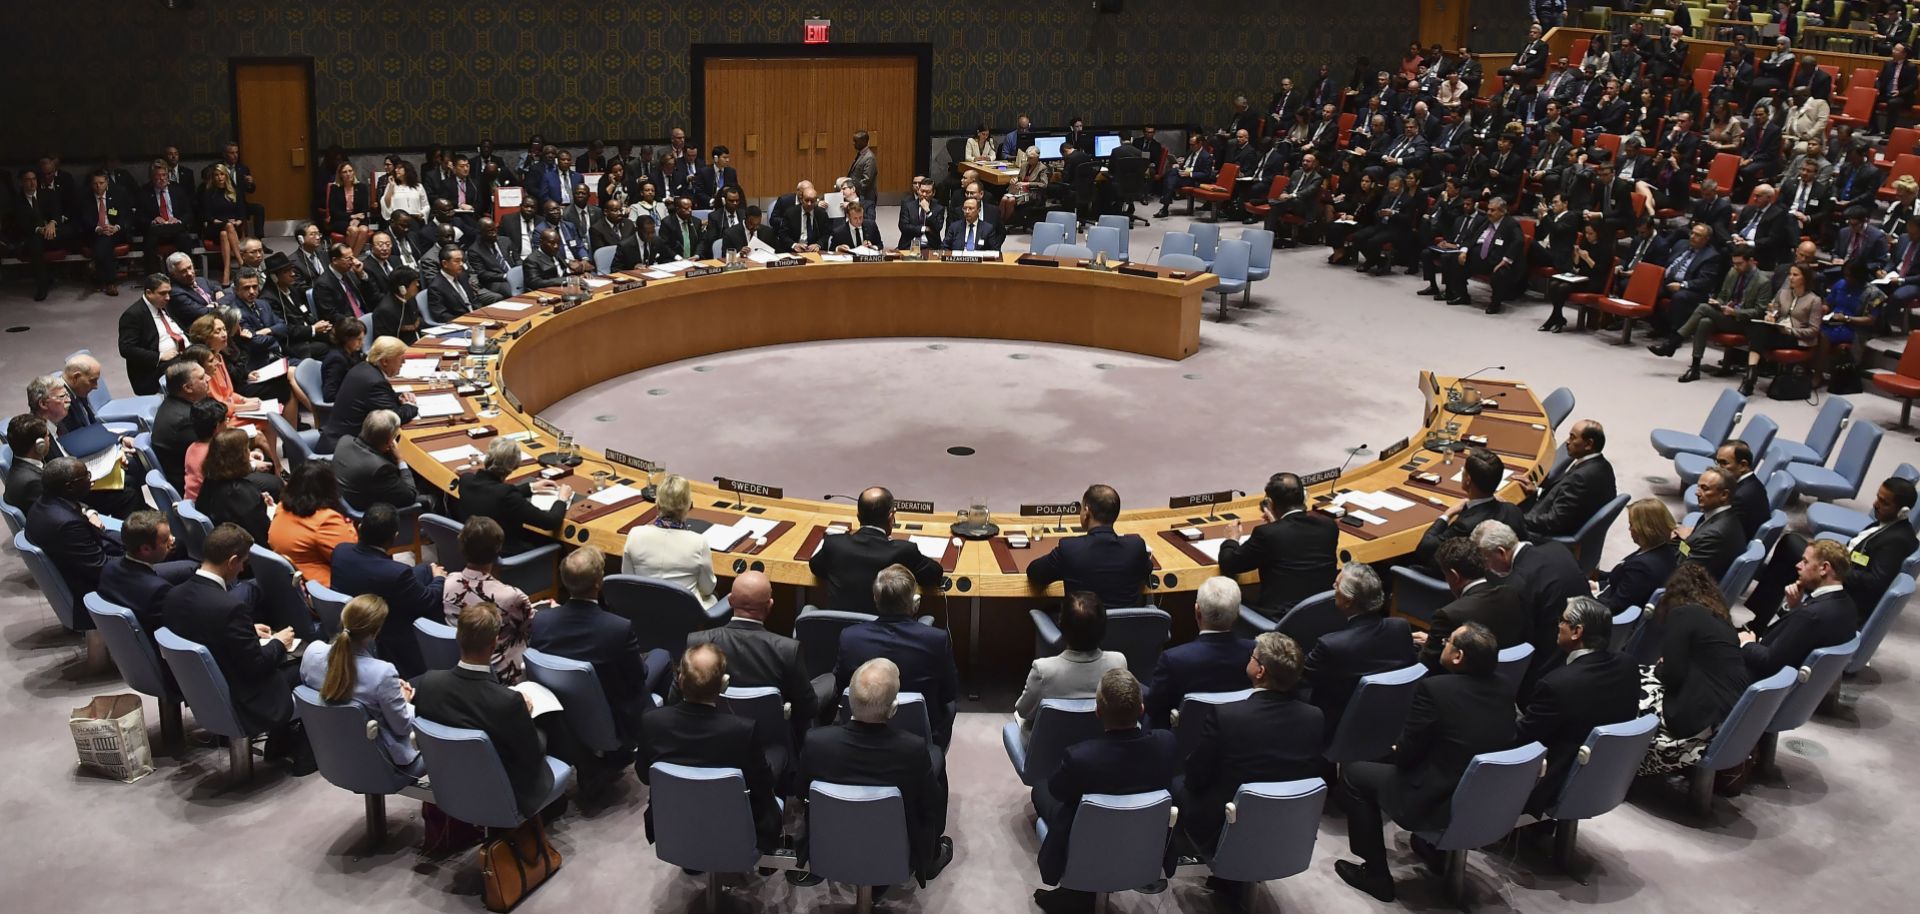 The Security Council meets for a briefing on counterproliferation at the United Nations in New York on Sept. 26, 2018.